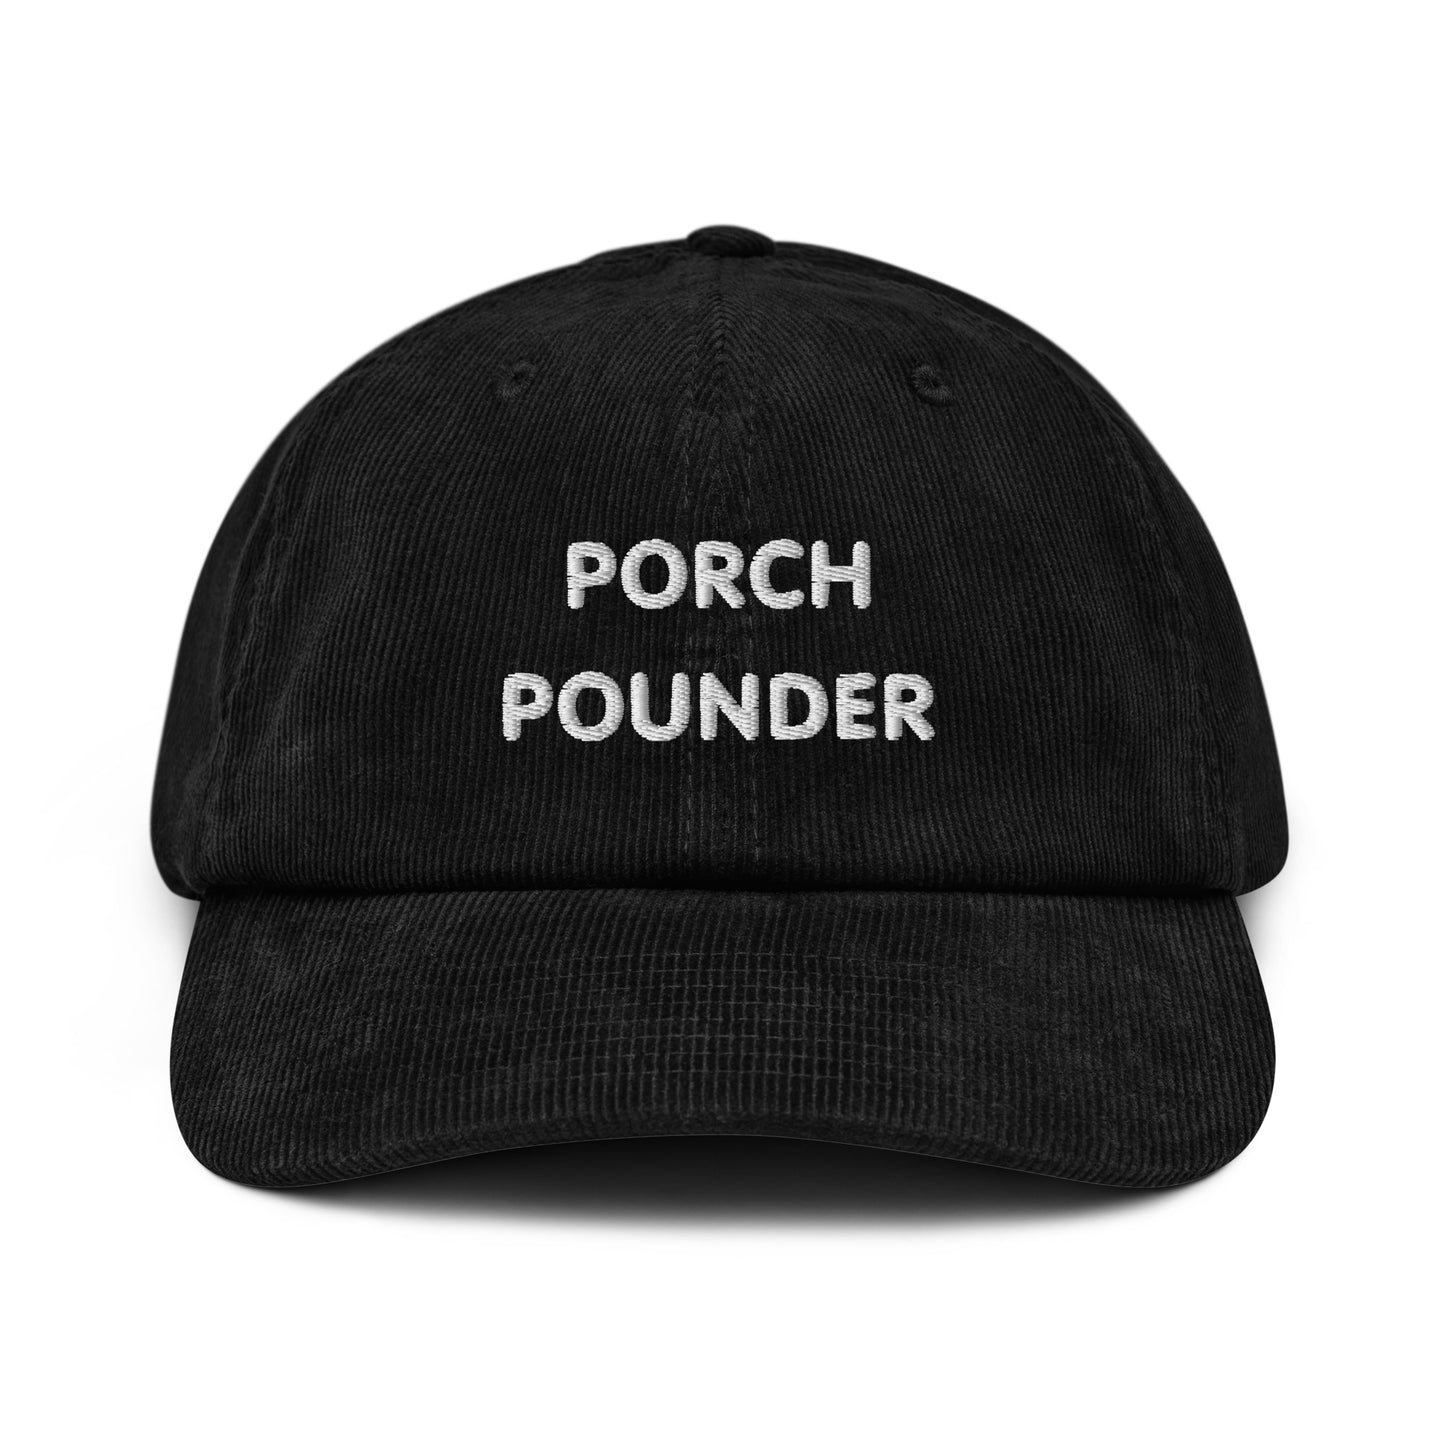 #PorchPounder - Embroidered Corduroy Hat